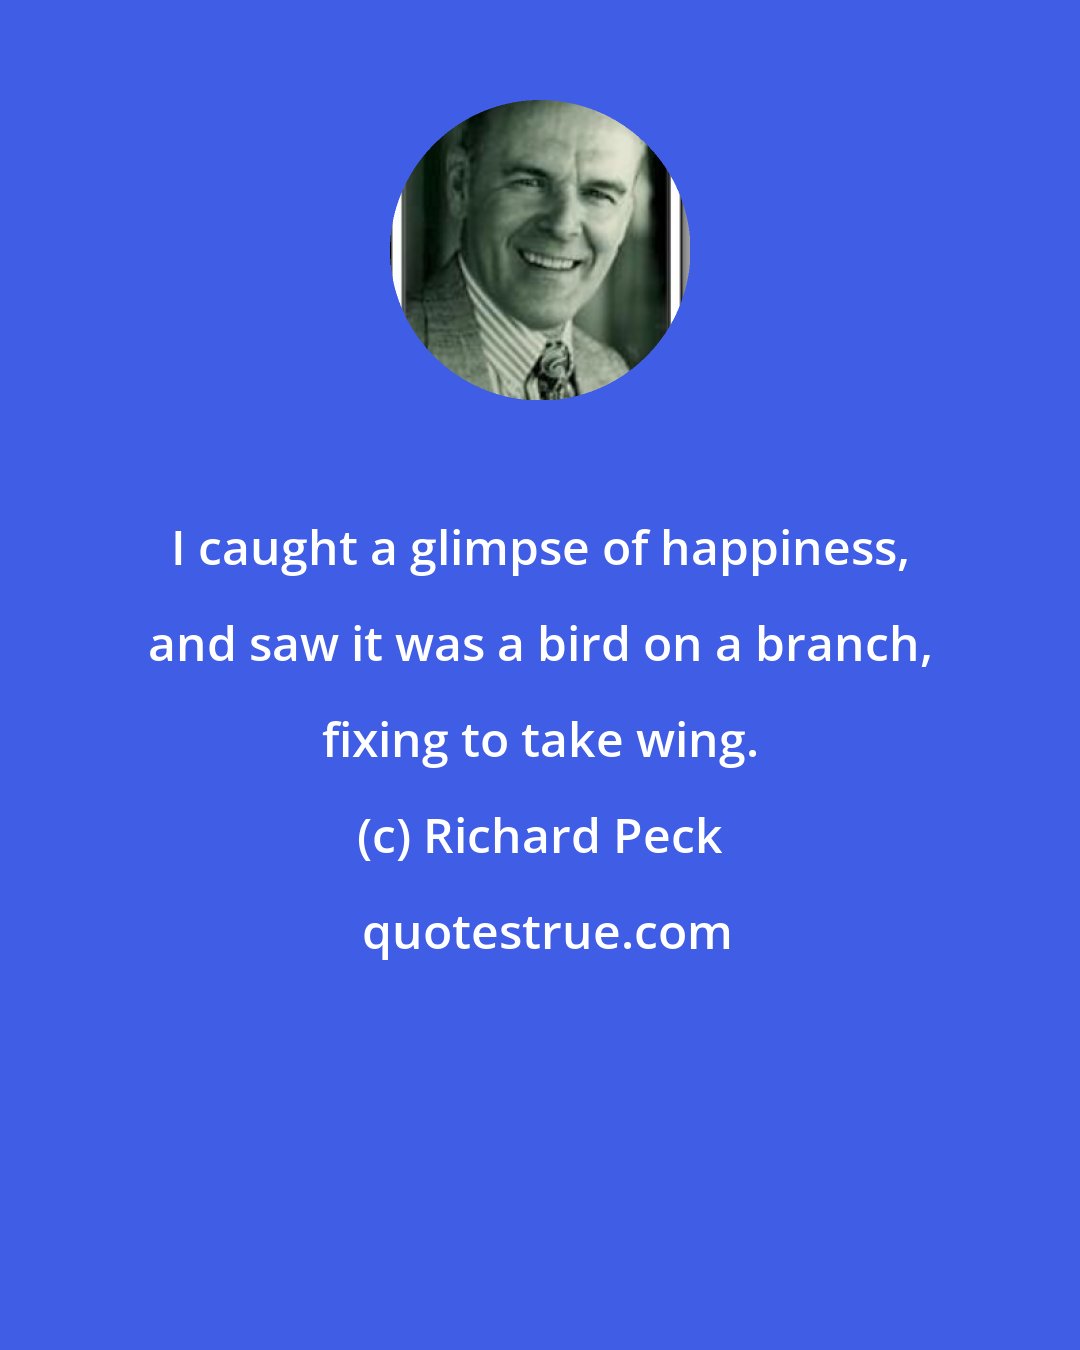 Richard Peck: I caught a glimpse of happiness, and saw it was a bird on a branch, fixing to take wing.